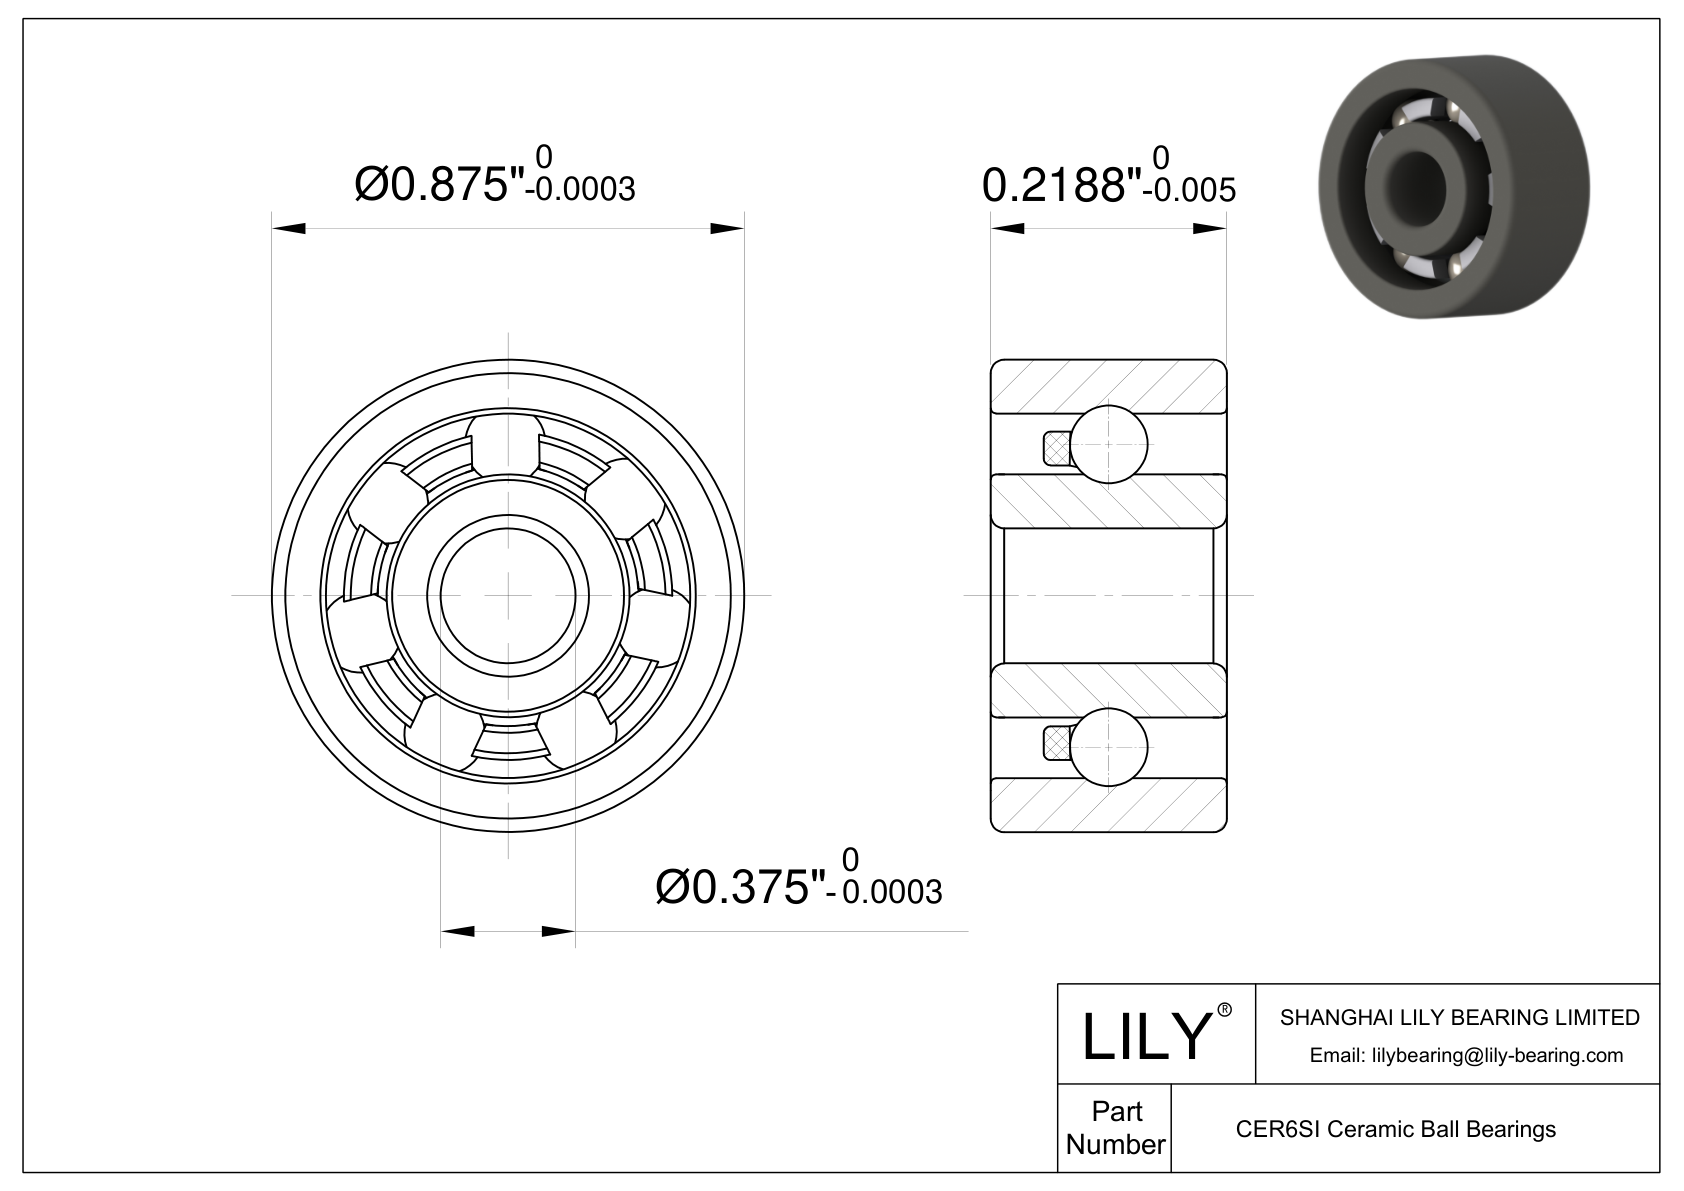 CESI R6 Inch Size Silicon Nitride Ceramic Bearings cad drawing